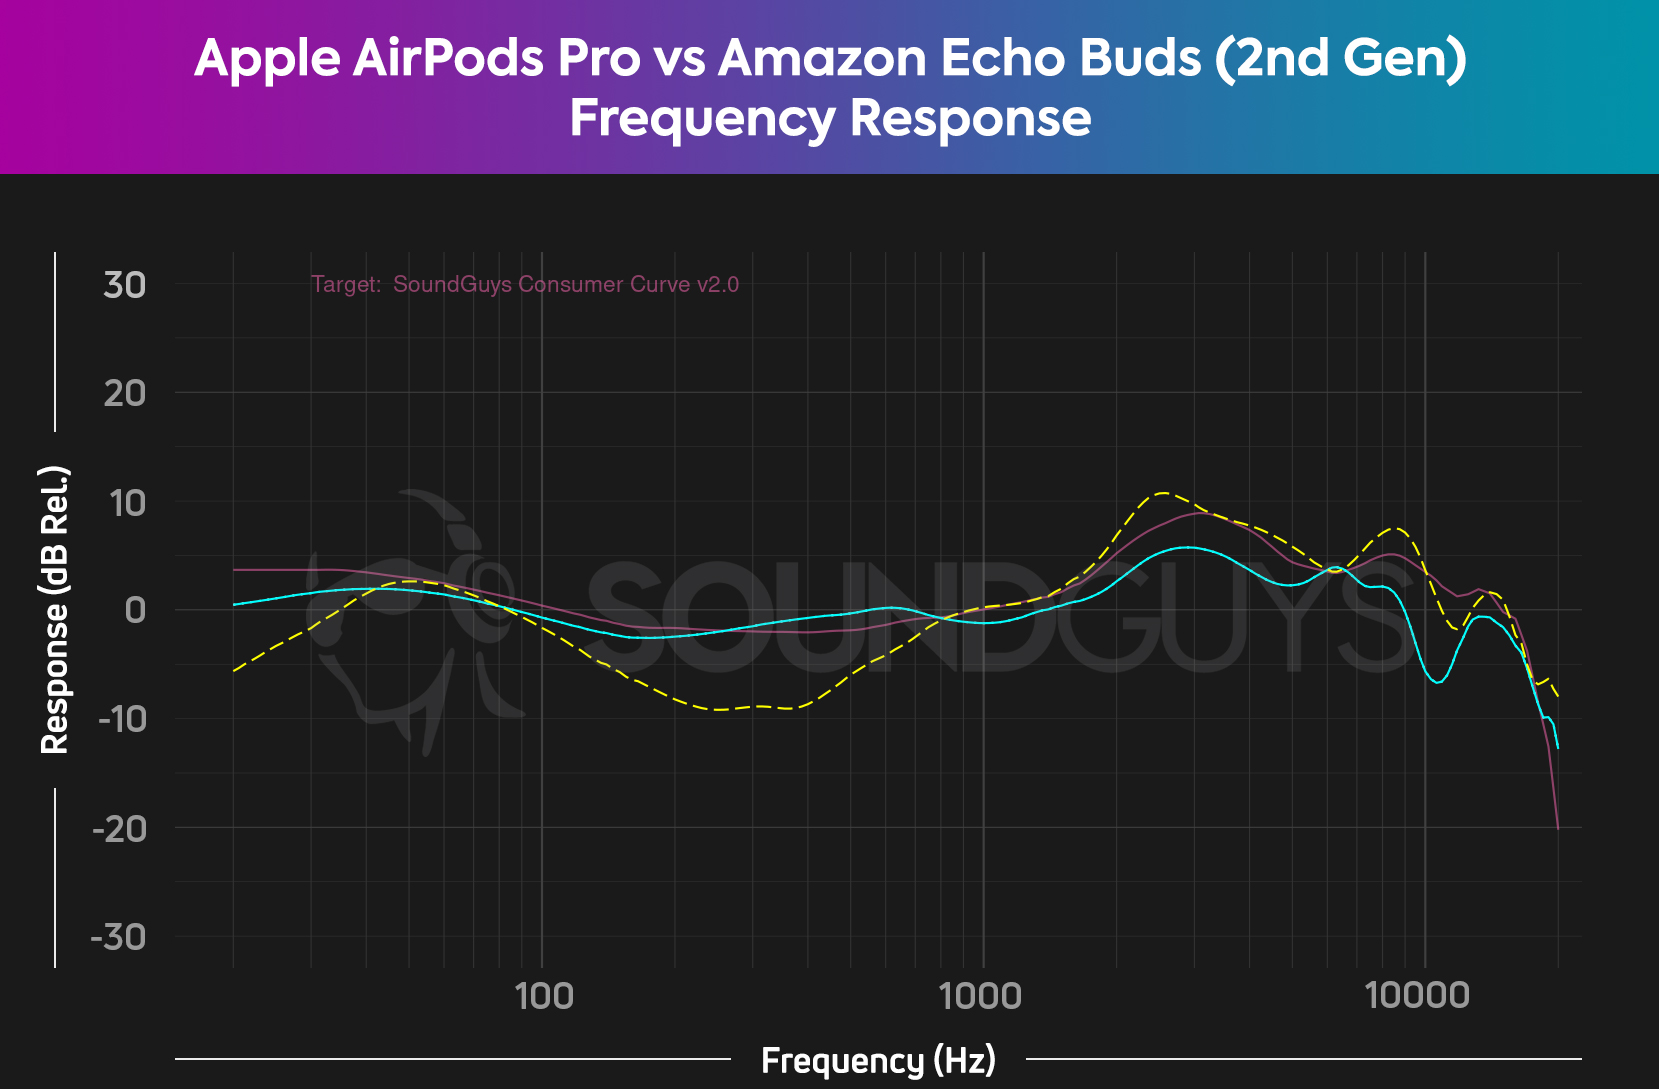 A frequency response chart compares the Apple AirPods Pro (cyan) to the Amazon Echo Buds (2nd Gen) (yellow dash) against our Consumer Curve V2.0 (pink), and shows the AirPods Pro has a more pleasant sound.